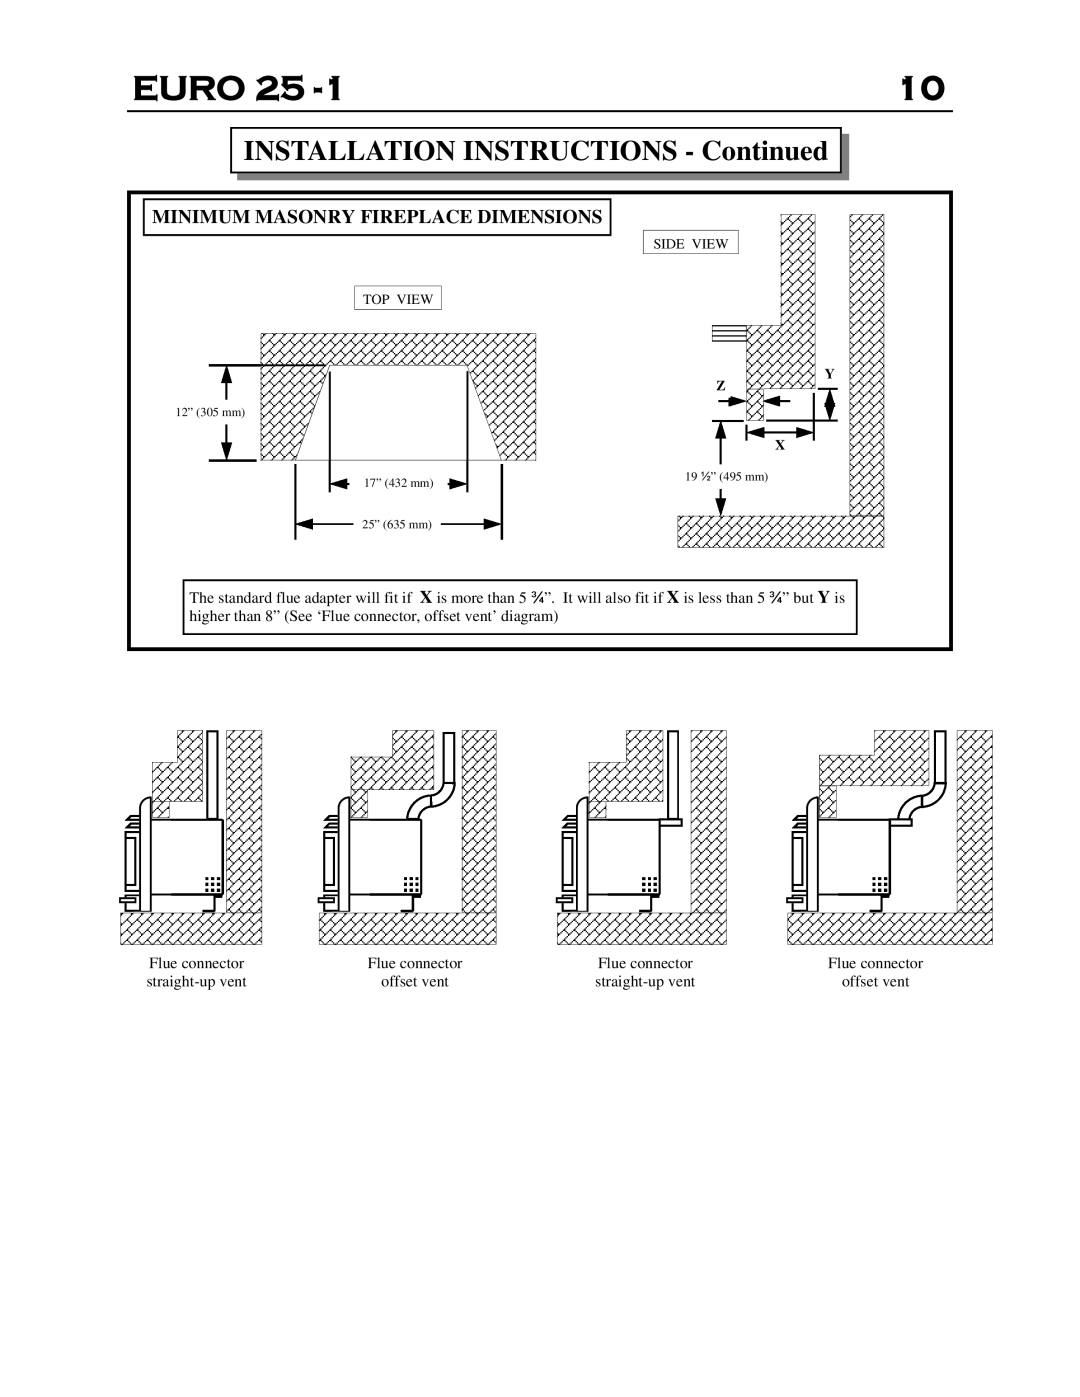 Delkin Devices EI - 25-1 manual INSTALLATION INSTRUCTIONS - Continued, Euro, 19 ½” 495 mm 